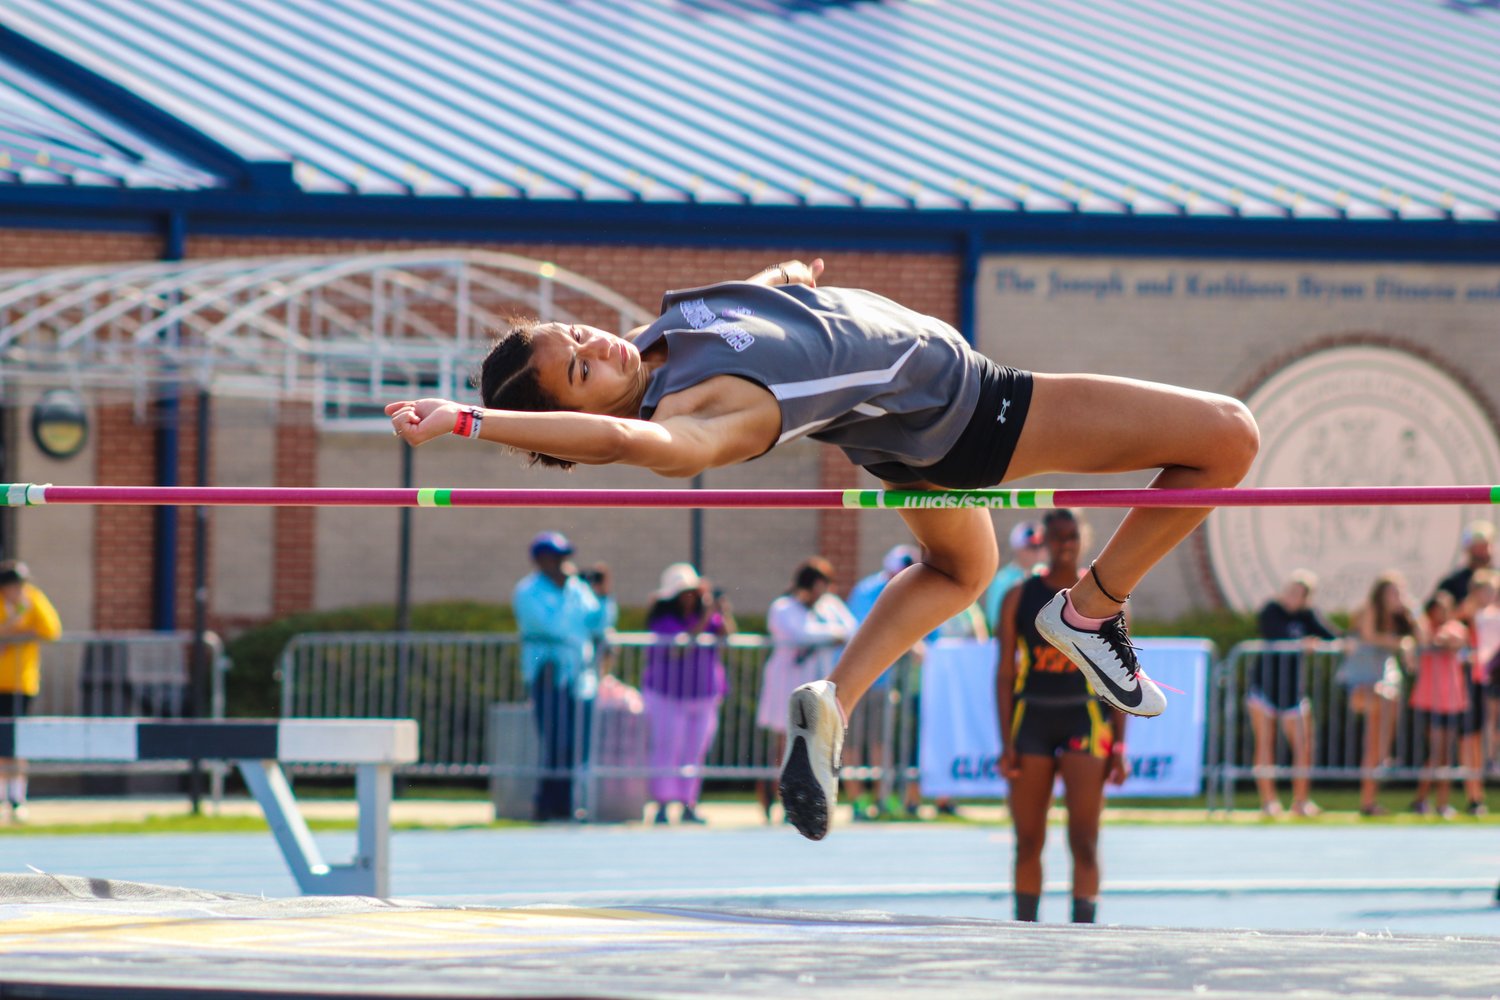 Chatham Charter junior Brooke Garner competes in the high jump at the 1A NCHSAA Track & Field State Championships at North Carolina A&T State University in Greensboro last Friday. The high jump was Garner's best event, where she placed fifth with a height of J04-08.00.